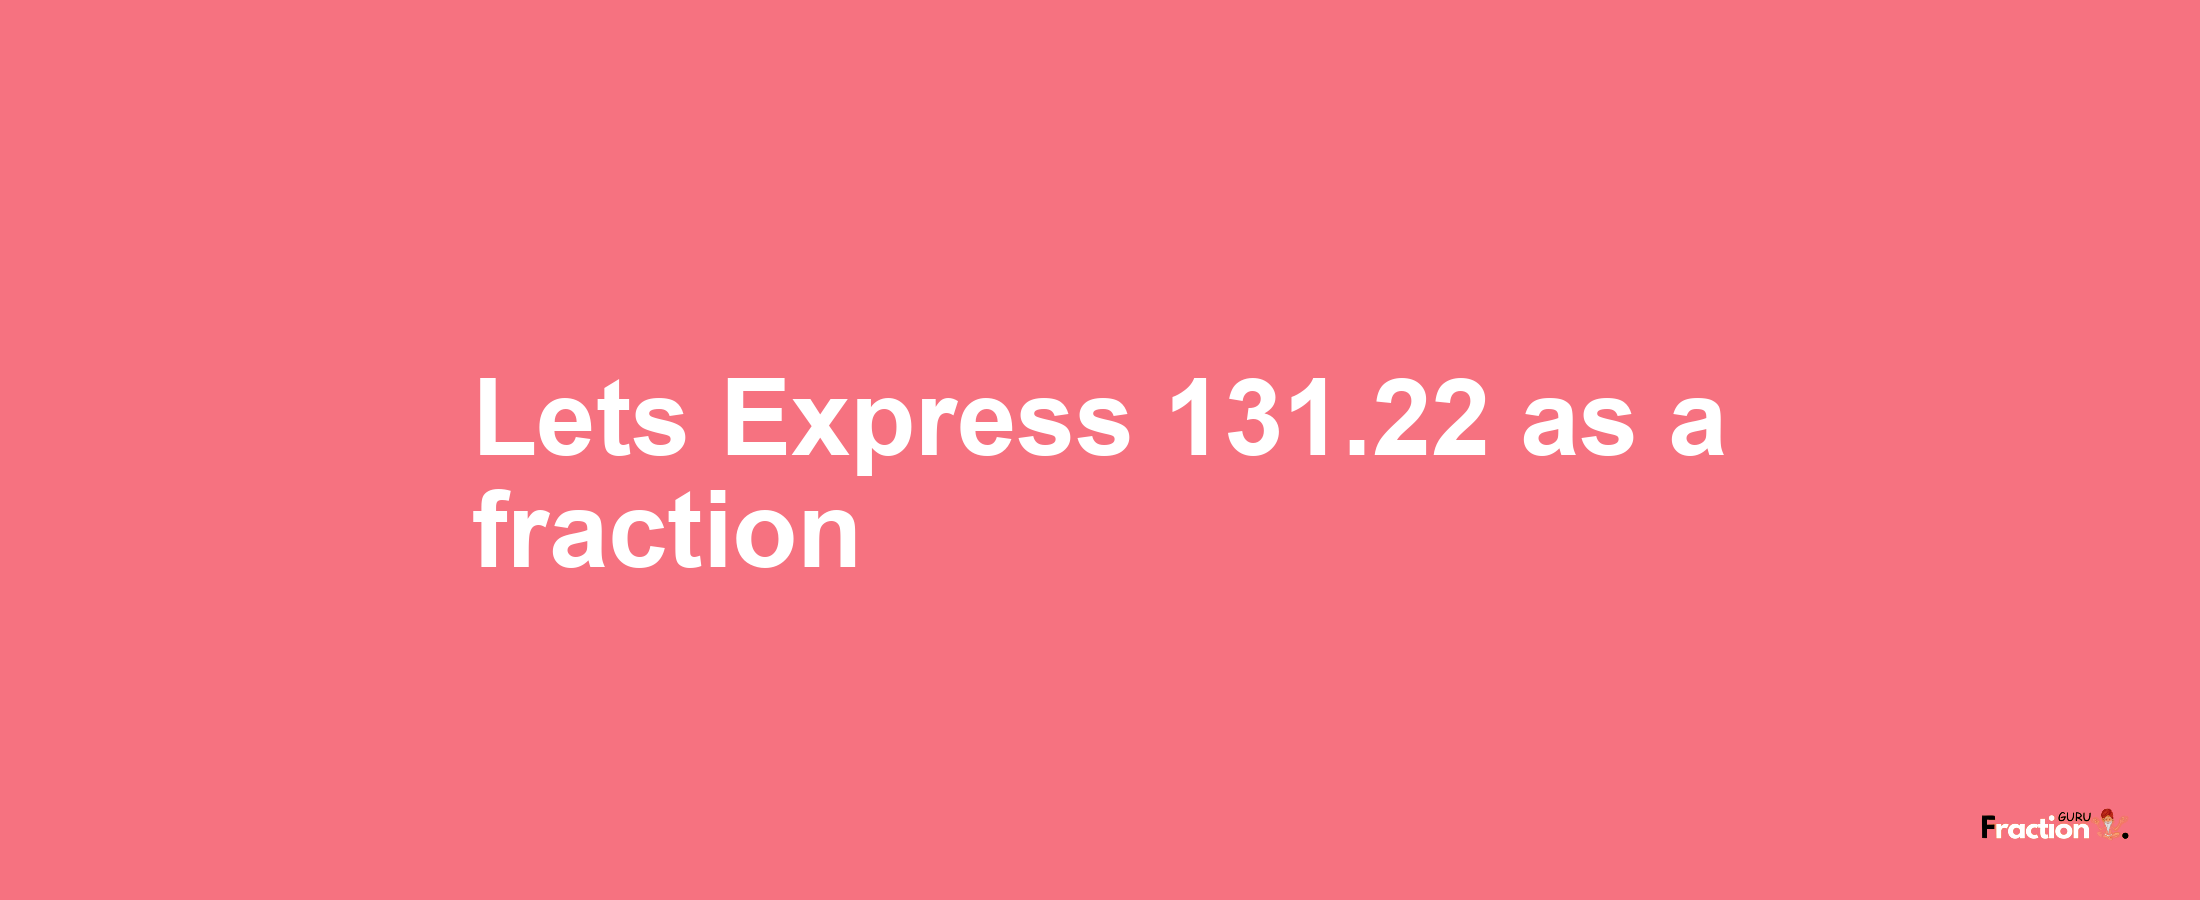 Lets Express 131.22 as afraction